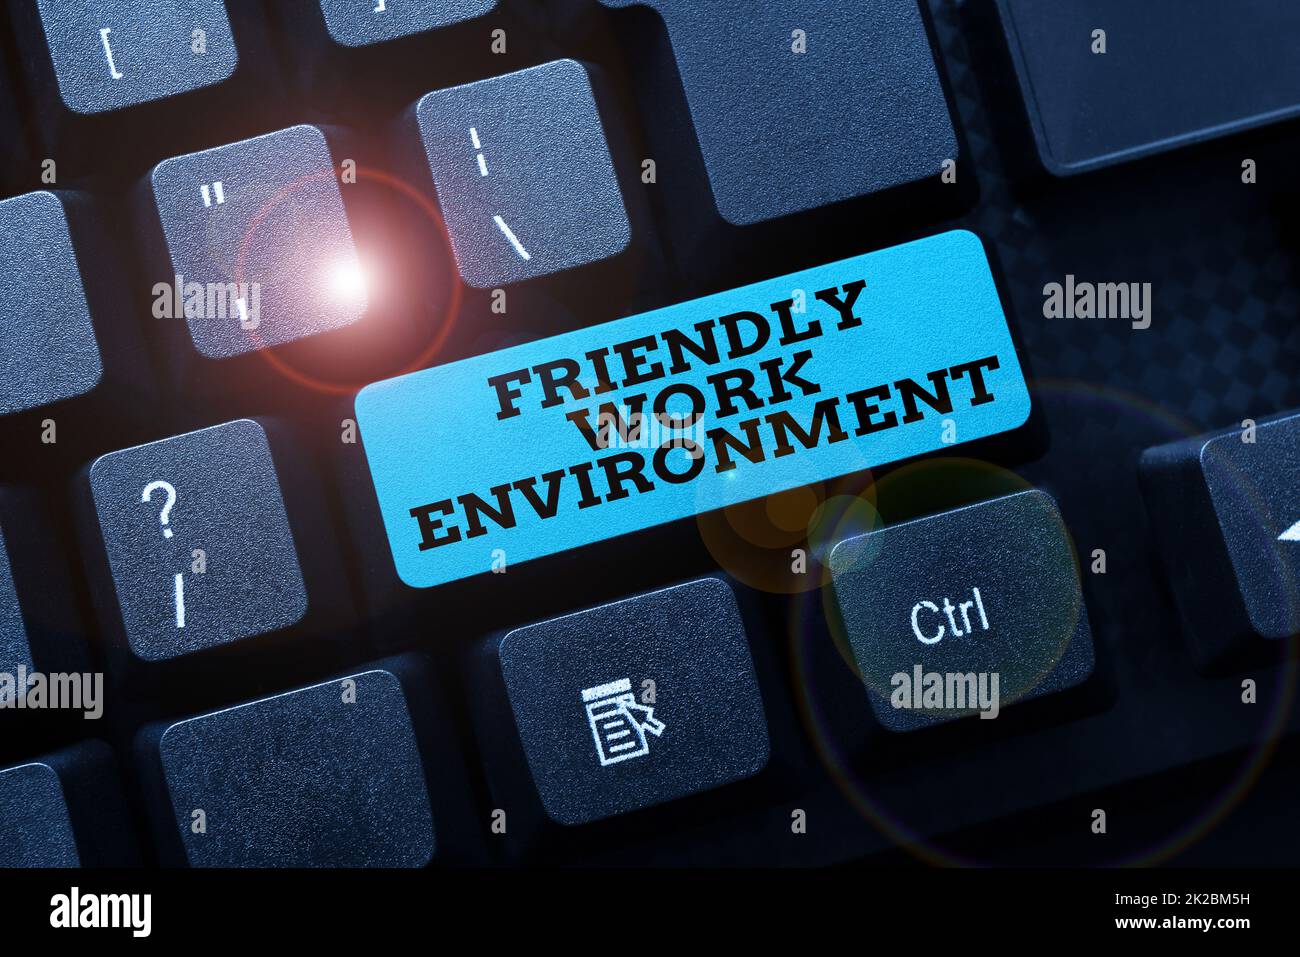 Writing displaying text Friendly Work Environment. Internet Concept future city smart, modern, highrise buildings environment Word Processing Program Ideas, Logging Programming Updates Concept Stock Photo